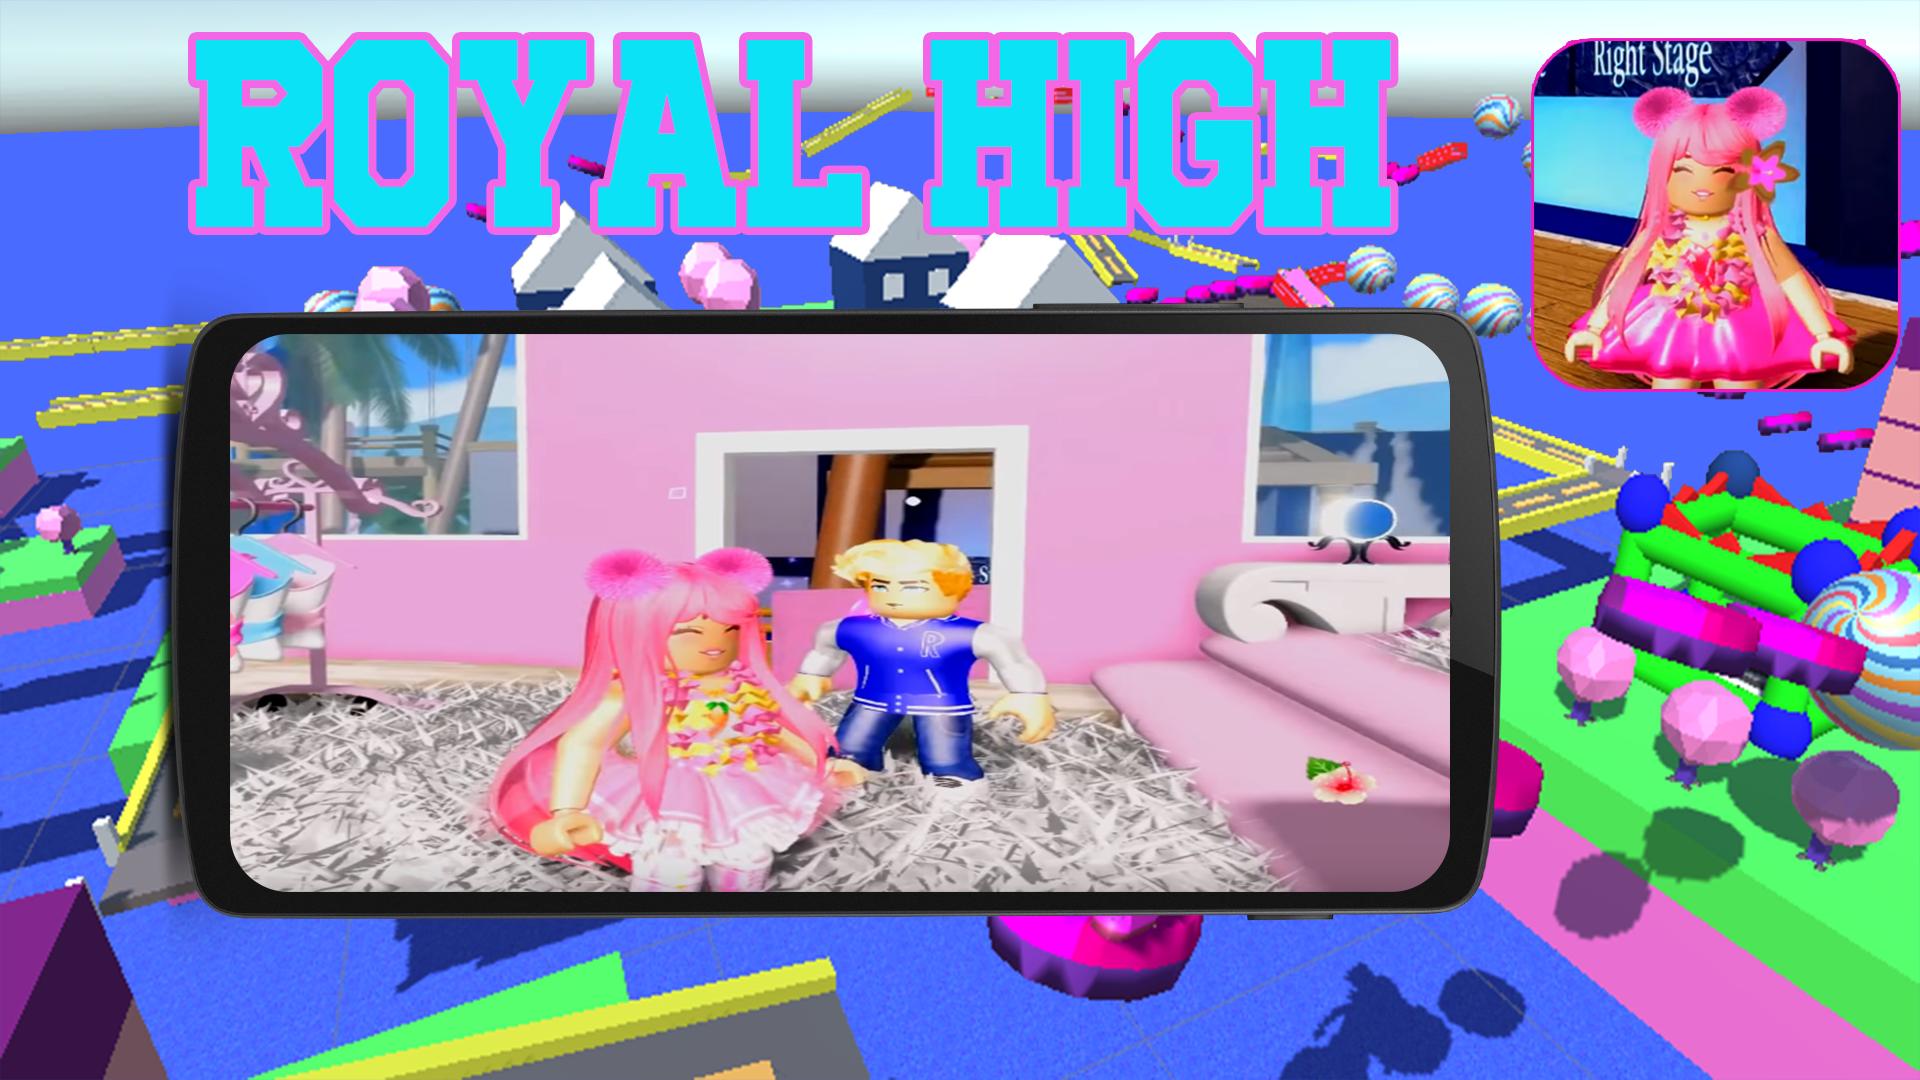 Royale High for Android - APK Download - 